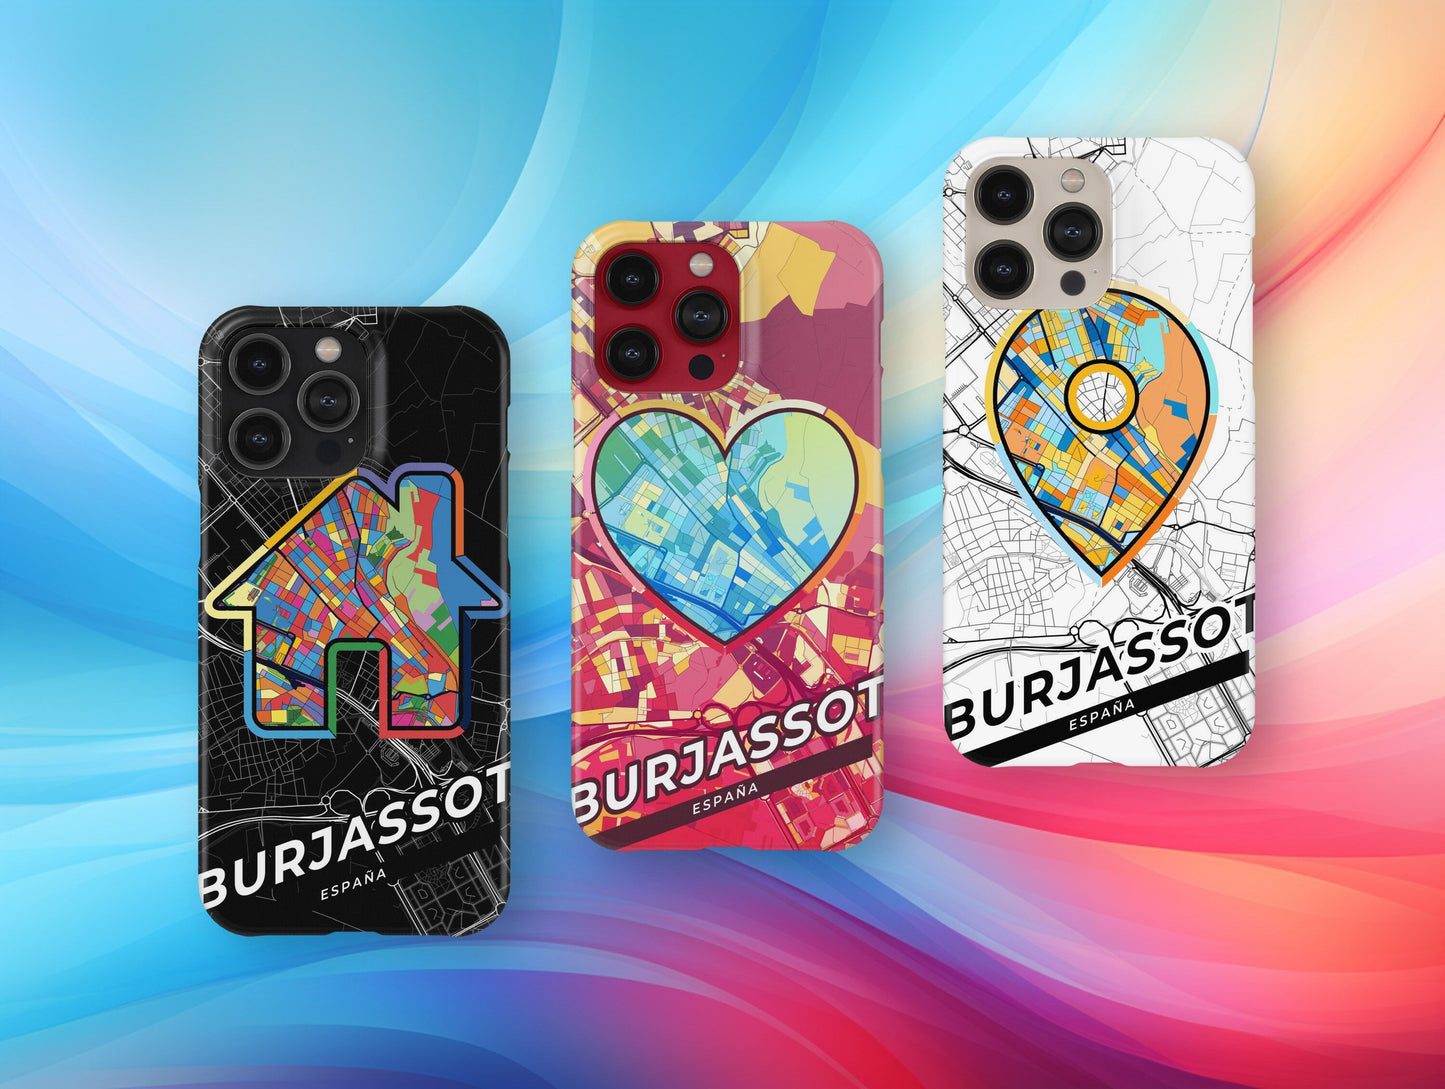 Burjassot Spain slim phone case with colorful icon. Birthday, wedding or housewarming gift. Couple match cases.